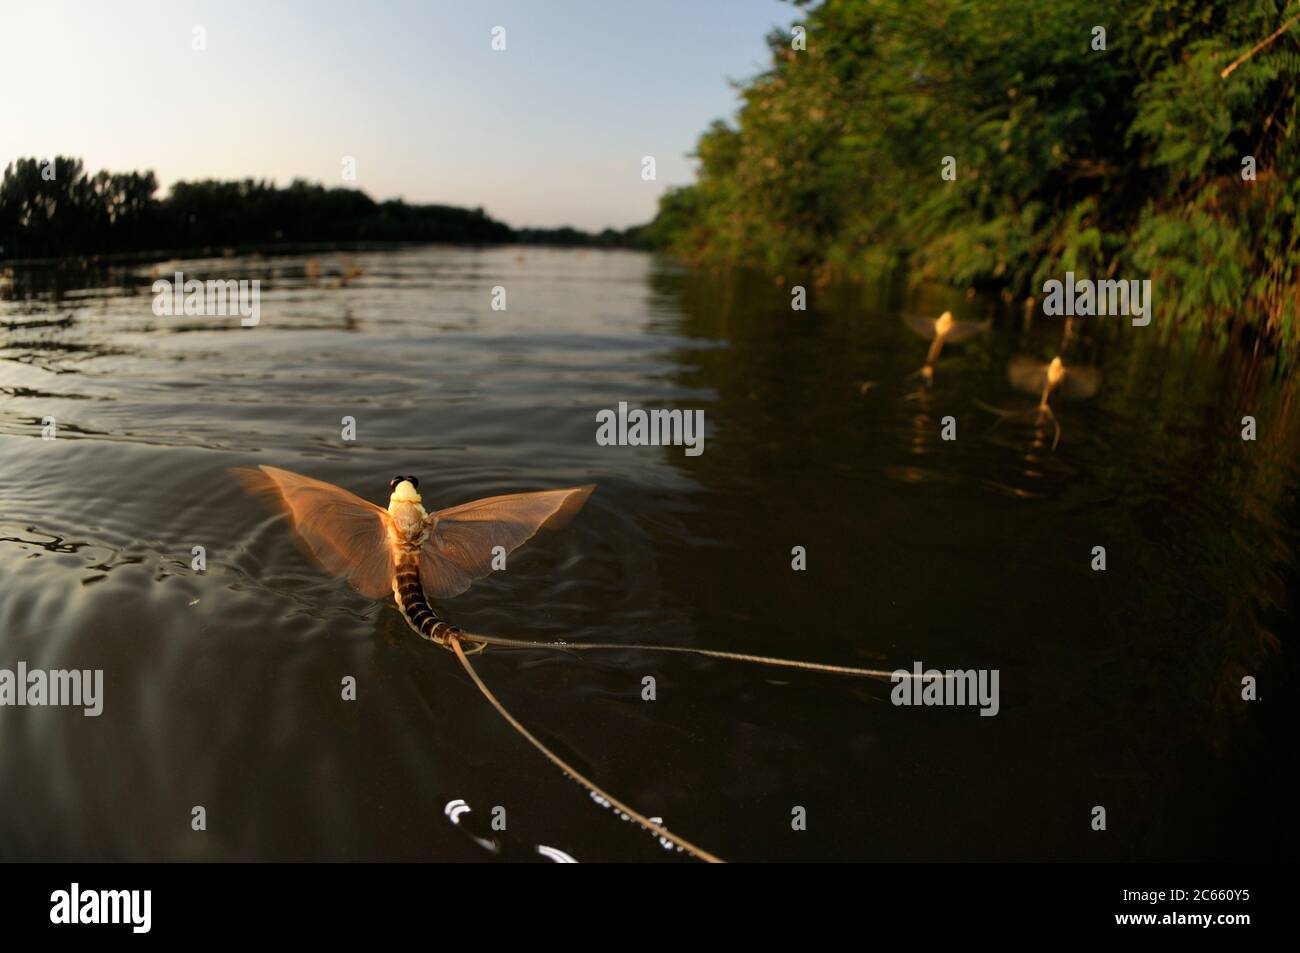 The first mature male long-tailed mayflies (Palingenia longicauda) are flying over the Tisza River searching for the females that are about to hatch half an hour later than the males. Tisza blooming (Tiszavirágzás). It is when millions of long-tailed mayflies (Palingenia longicauda) are rising in huge clouds, reproduce, and perish, all in just a few hours. Stock Photo